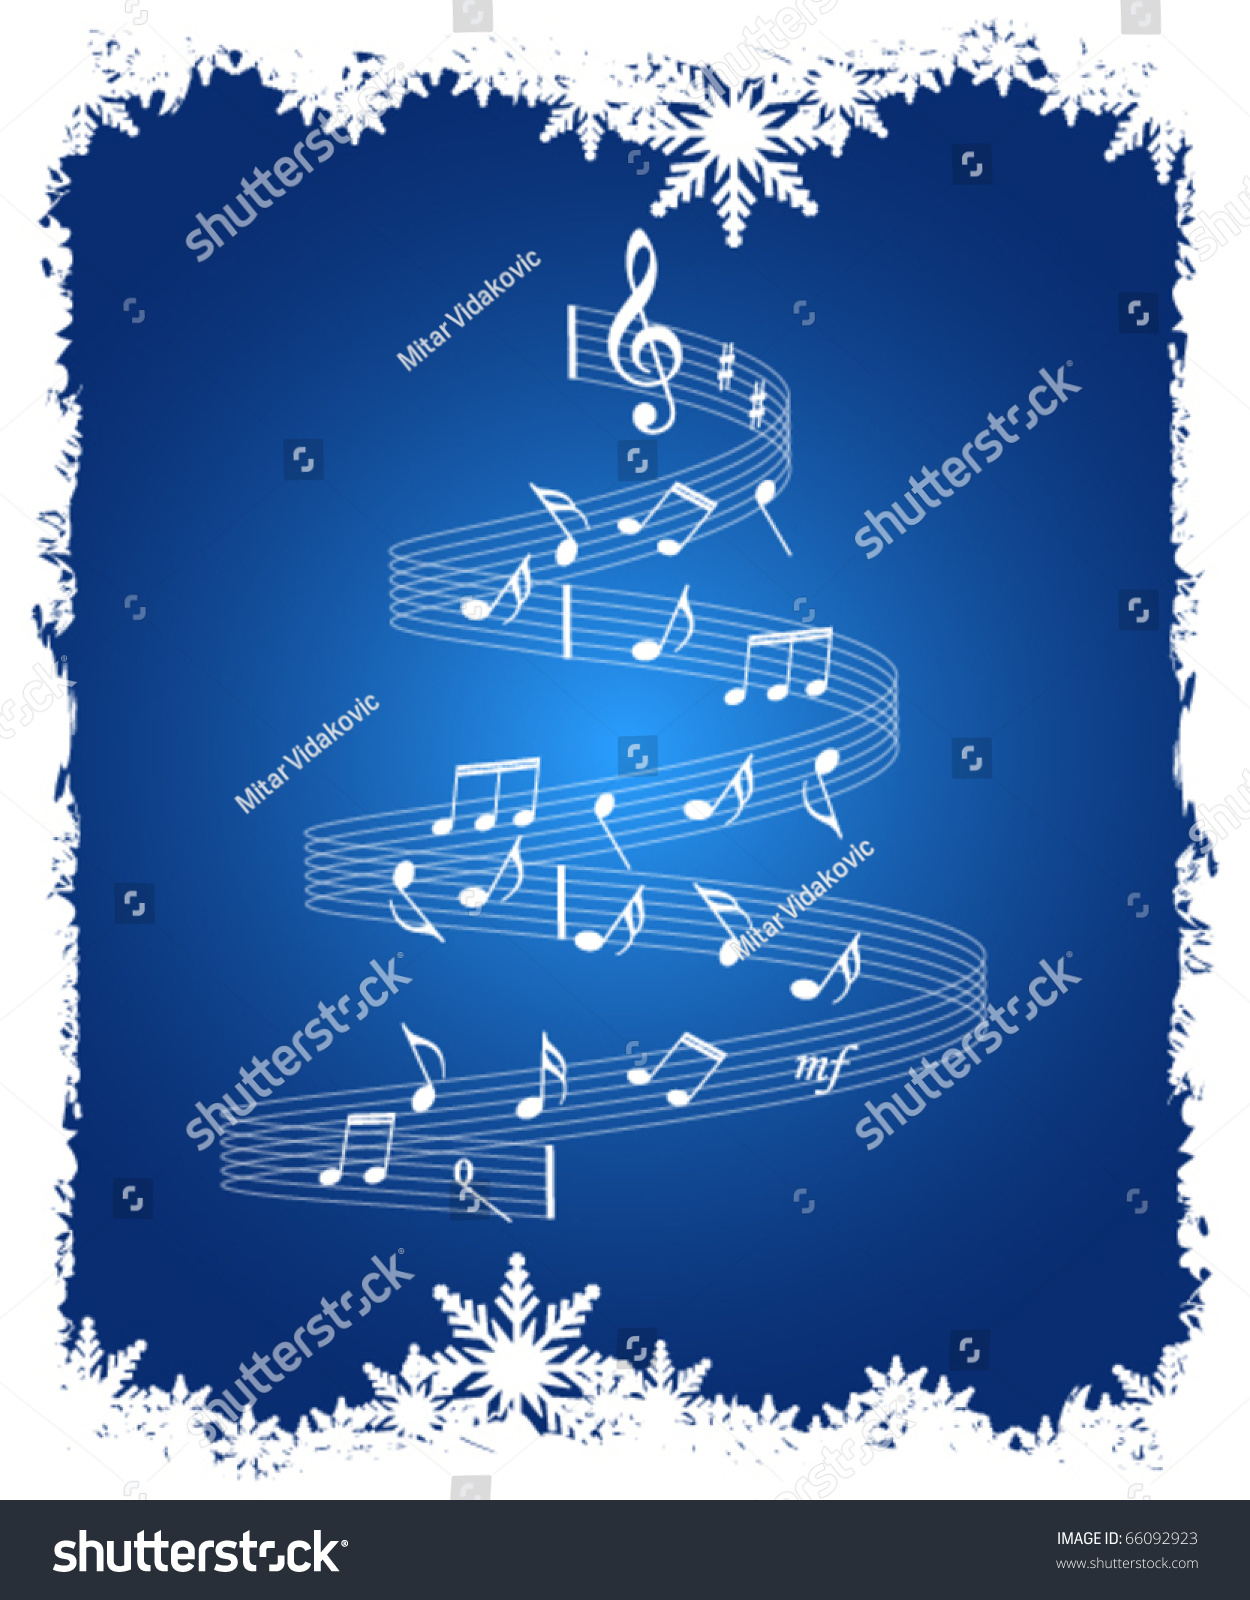 Christmas Music Notes Vector Background - 66092923 : Shutterstock